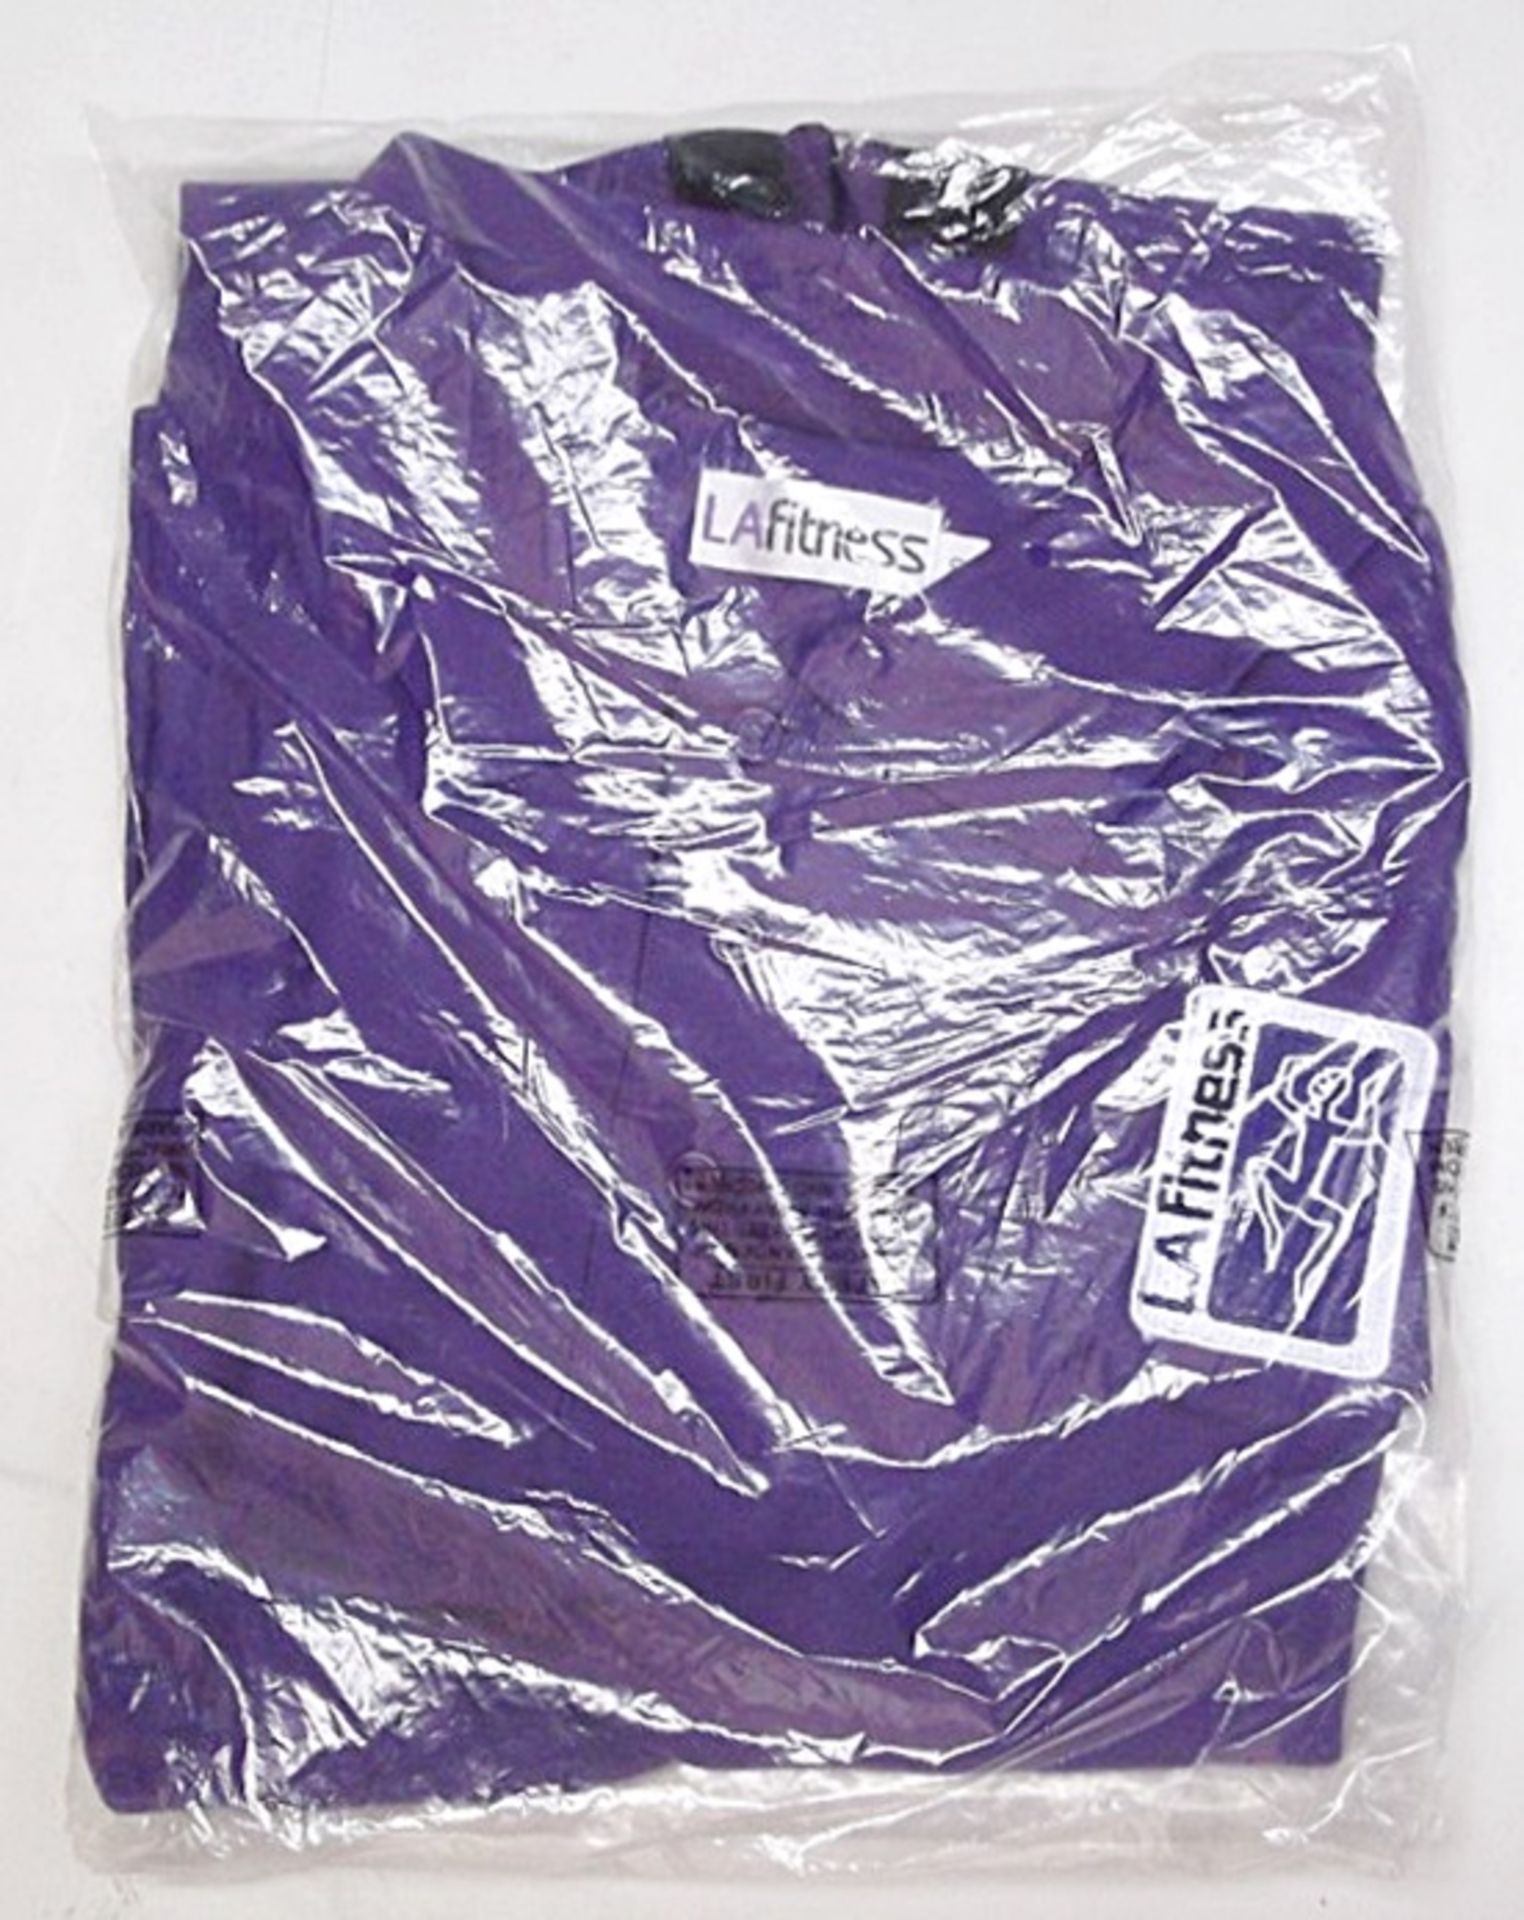 10 x LA Fitness Branded POLO Shirts - Size XXXL - Colour: Purple - CL155 - New & Sealed - - Image 2 of 3